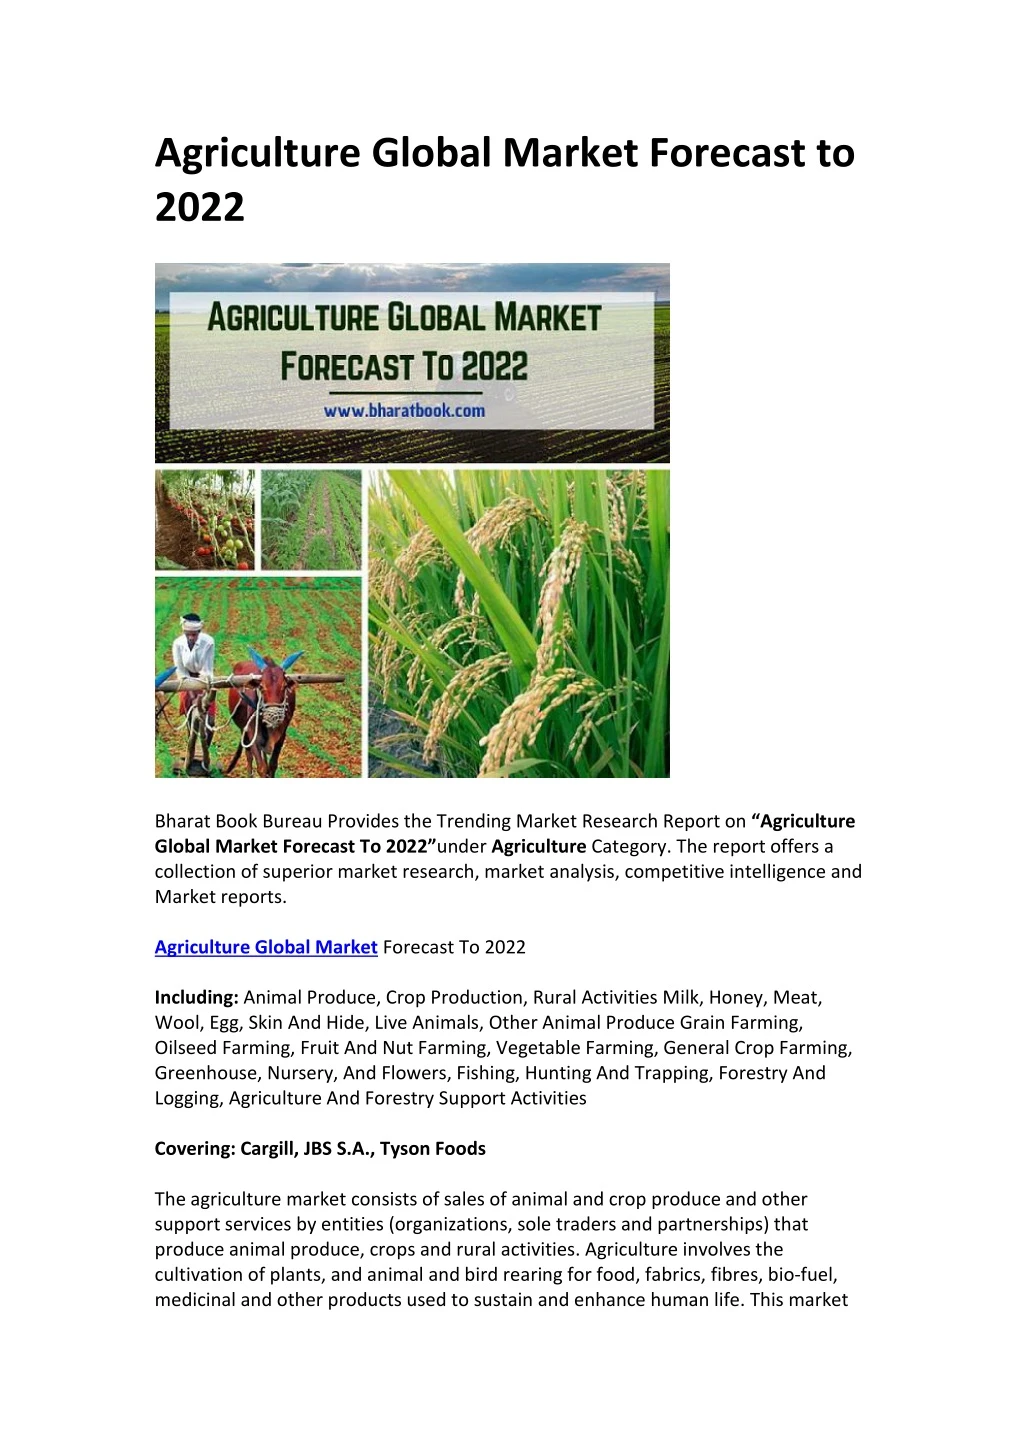 agriculture global market forecast to 2022